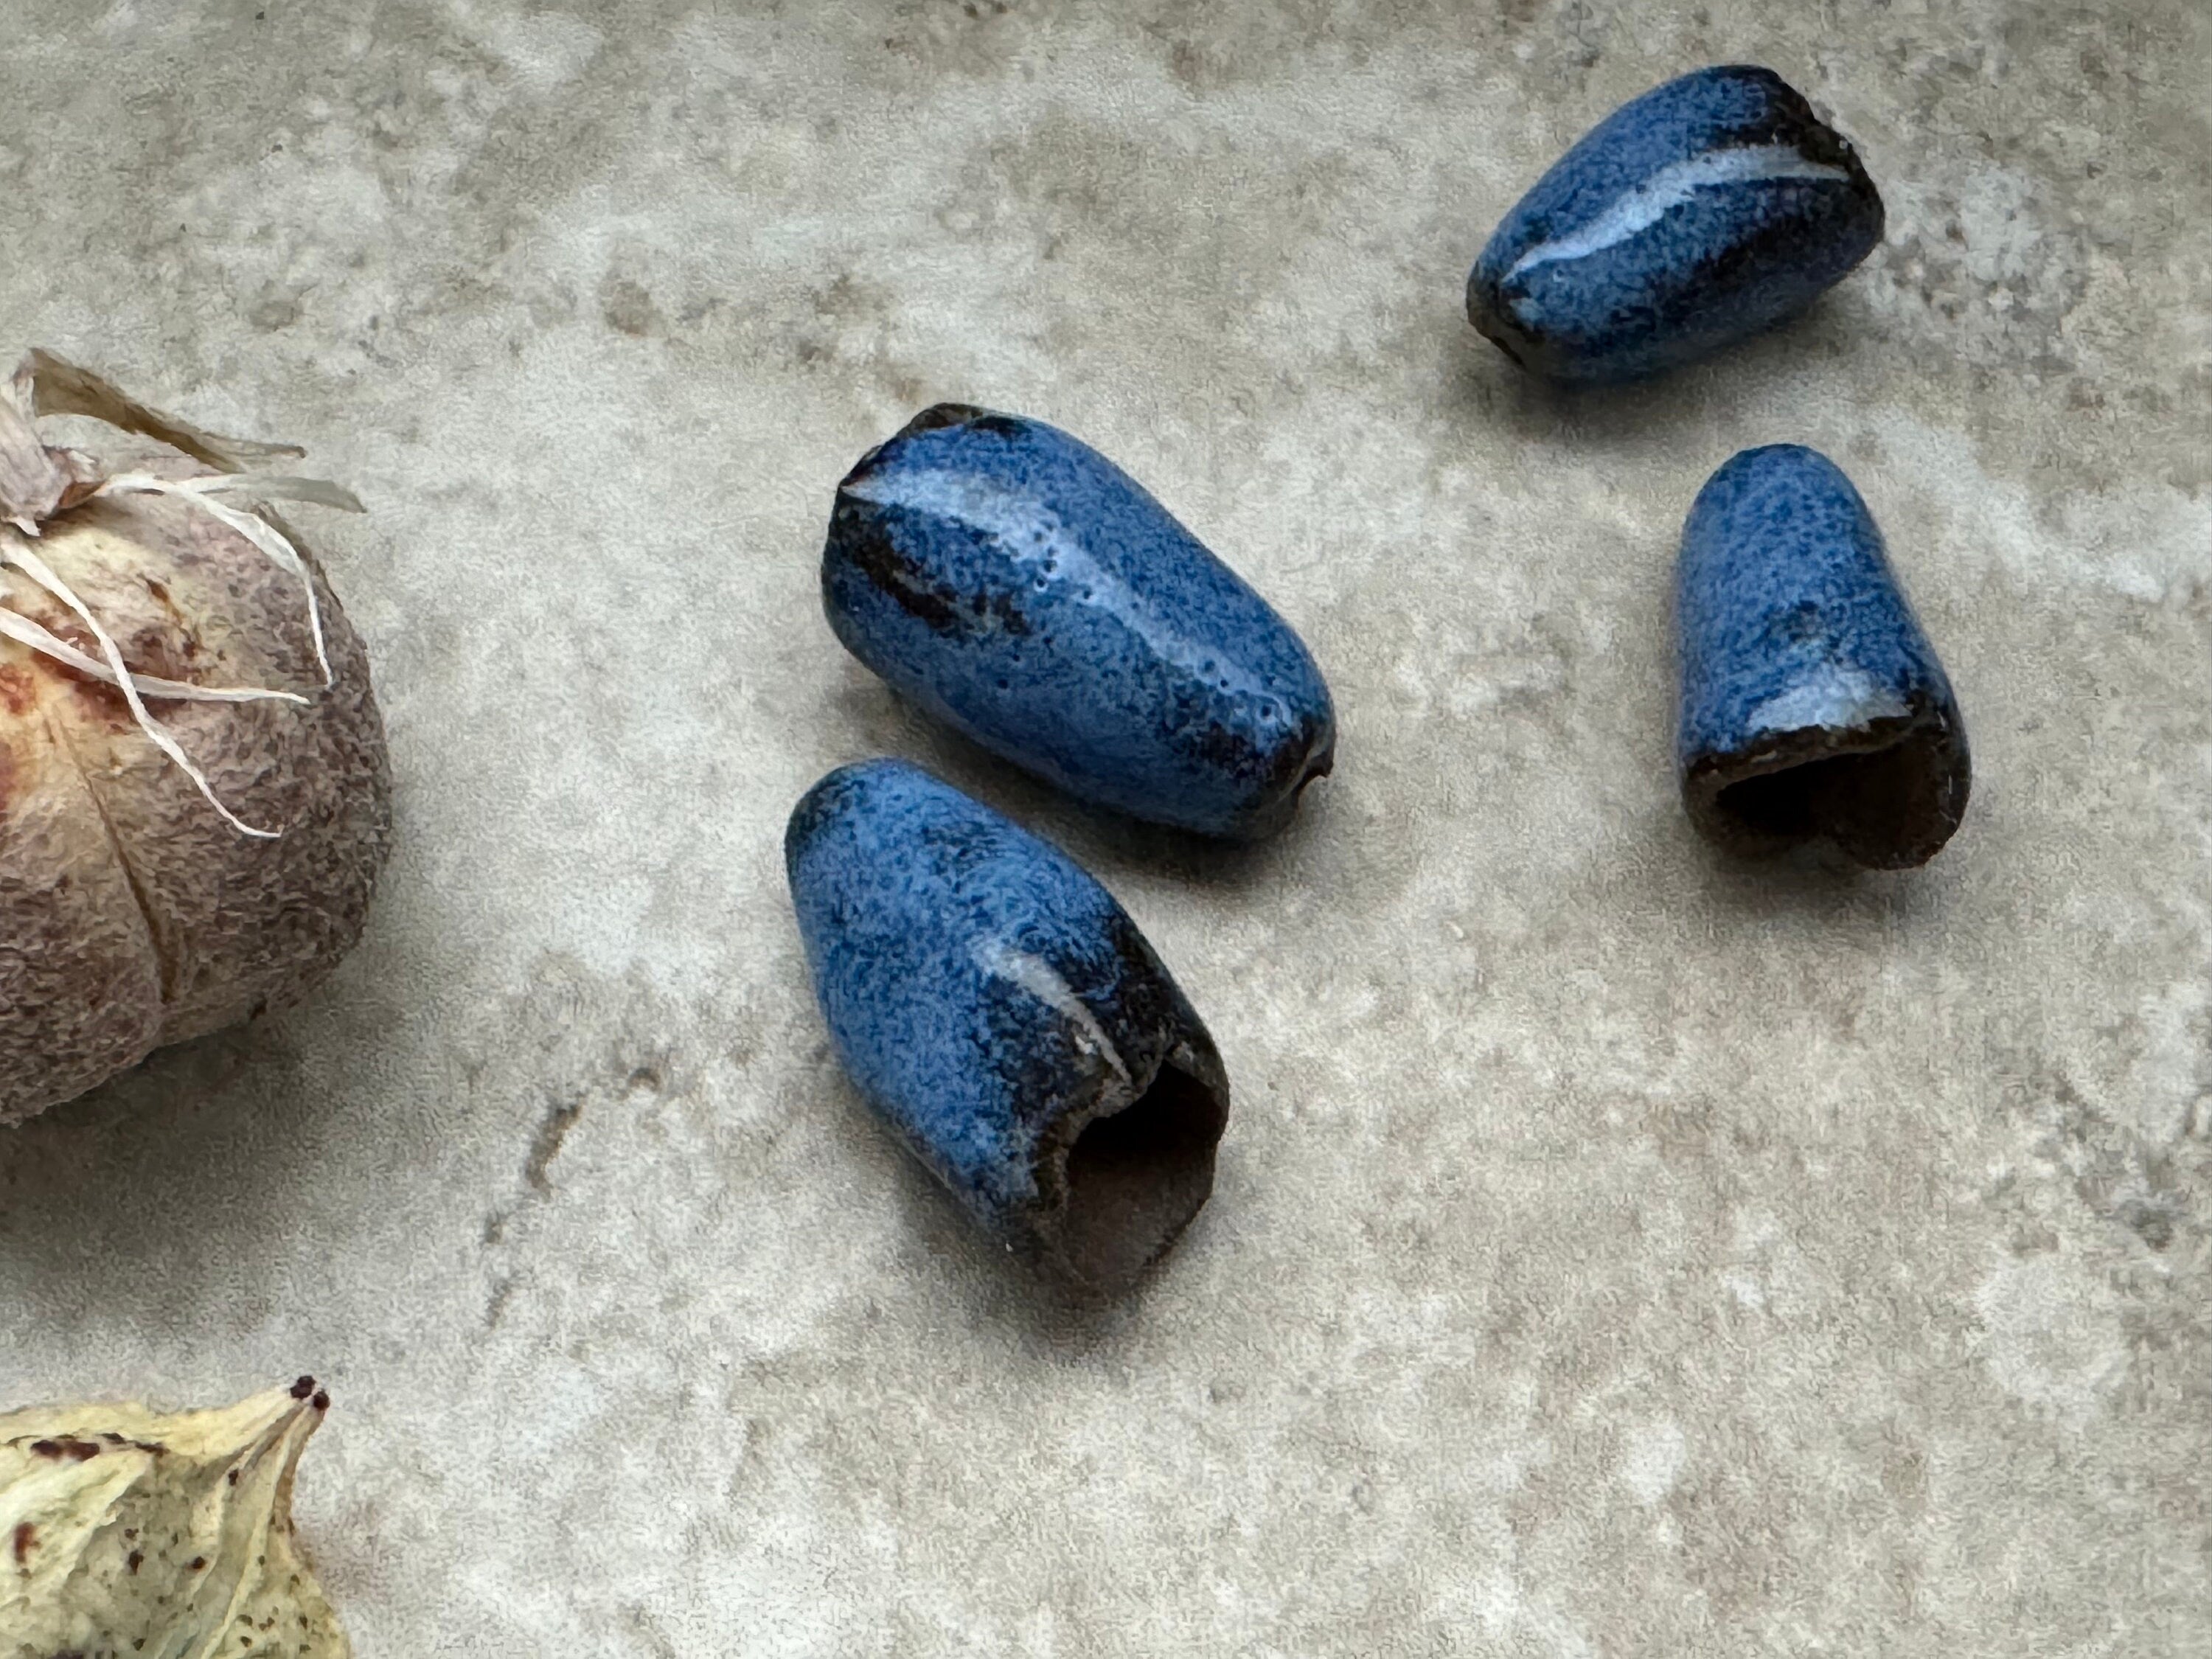 London Blue Beads, Organic Beads, Pod Earring Pair, Porcelain Ceramic Charms, Jewelry Making Components, Bell Beads, DIY Earrings